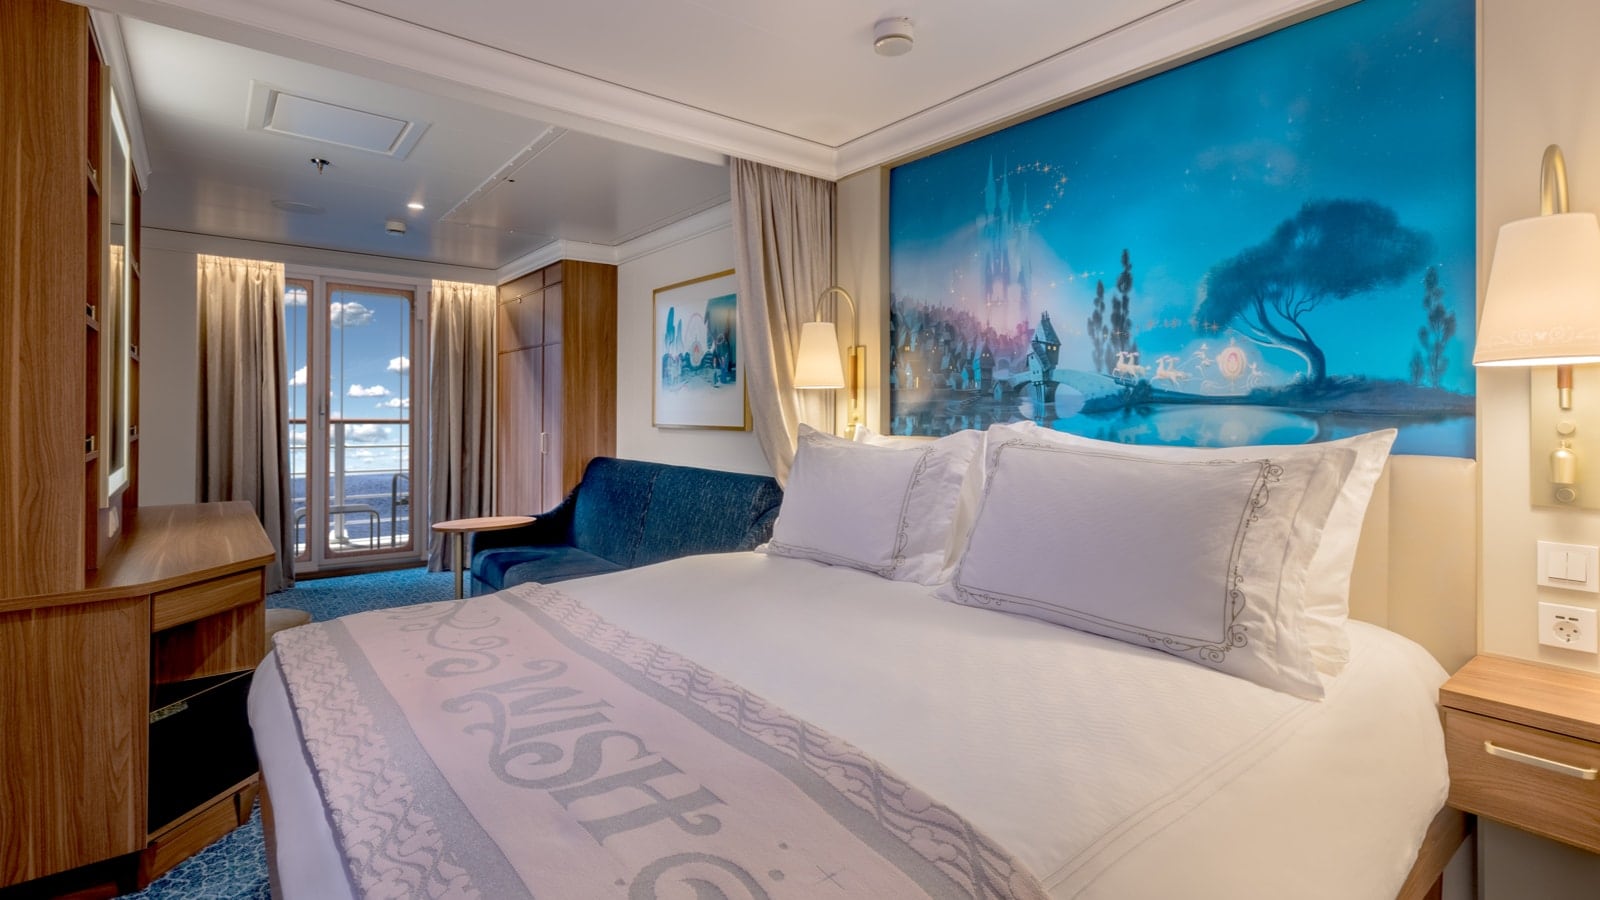 A spacious Verandah Stateroom aboard the Disney Wish with a mural inspired by the Disney animated movie Cinderella